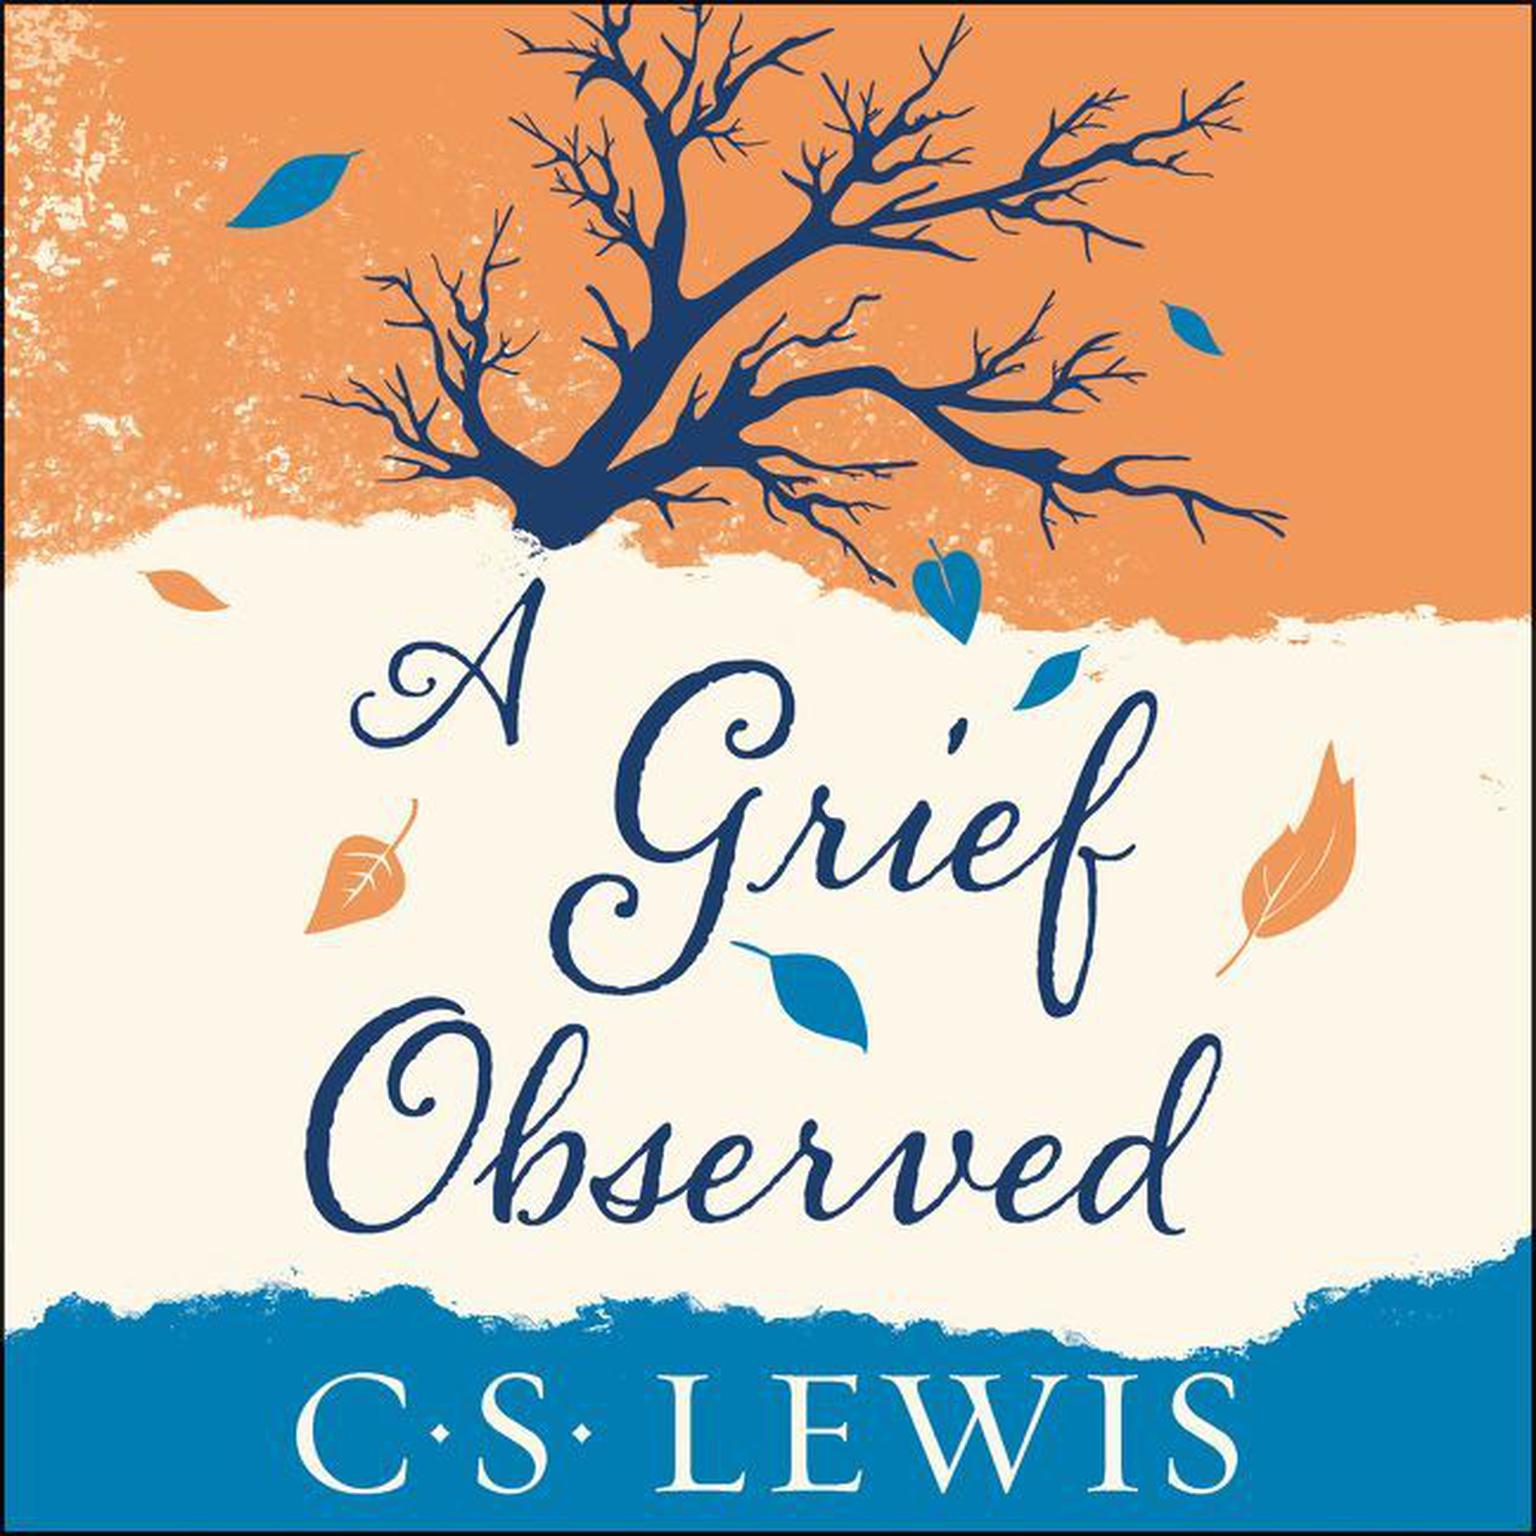 A Grief Observed Audiobook, by C. S. Lewis